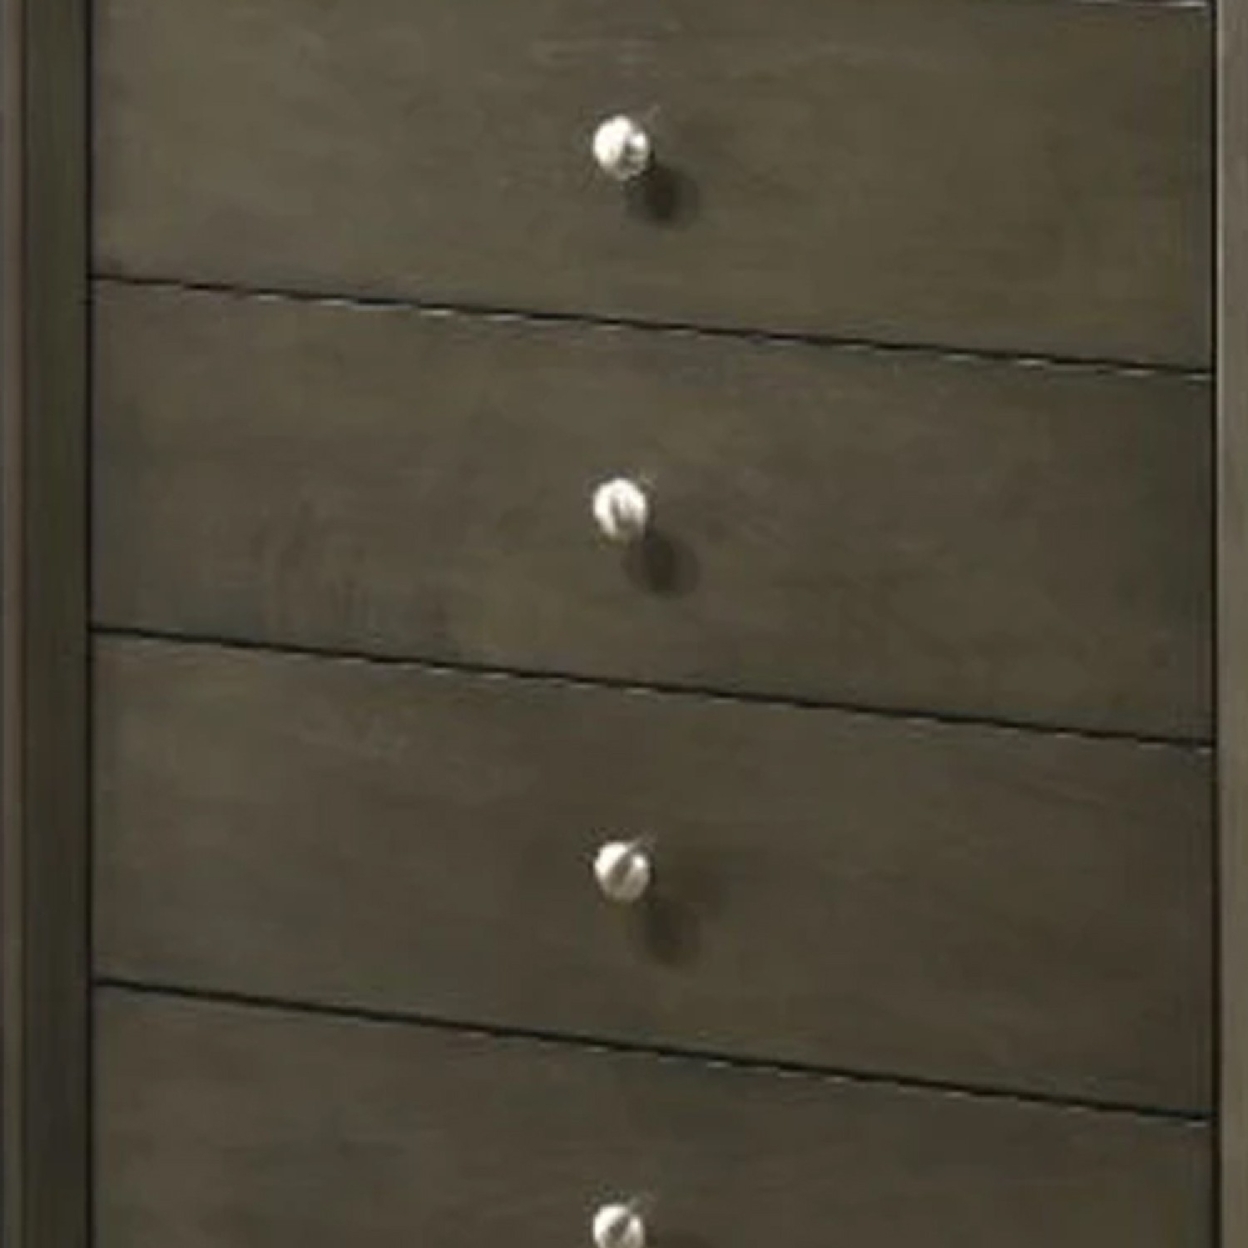 Chest With 9 Drawers And Panel Base Support, Gray- Saltoro Sherpi